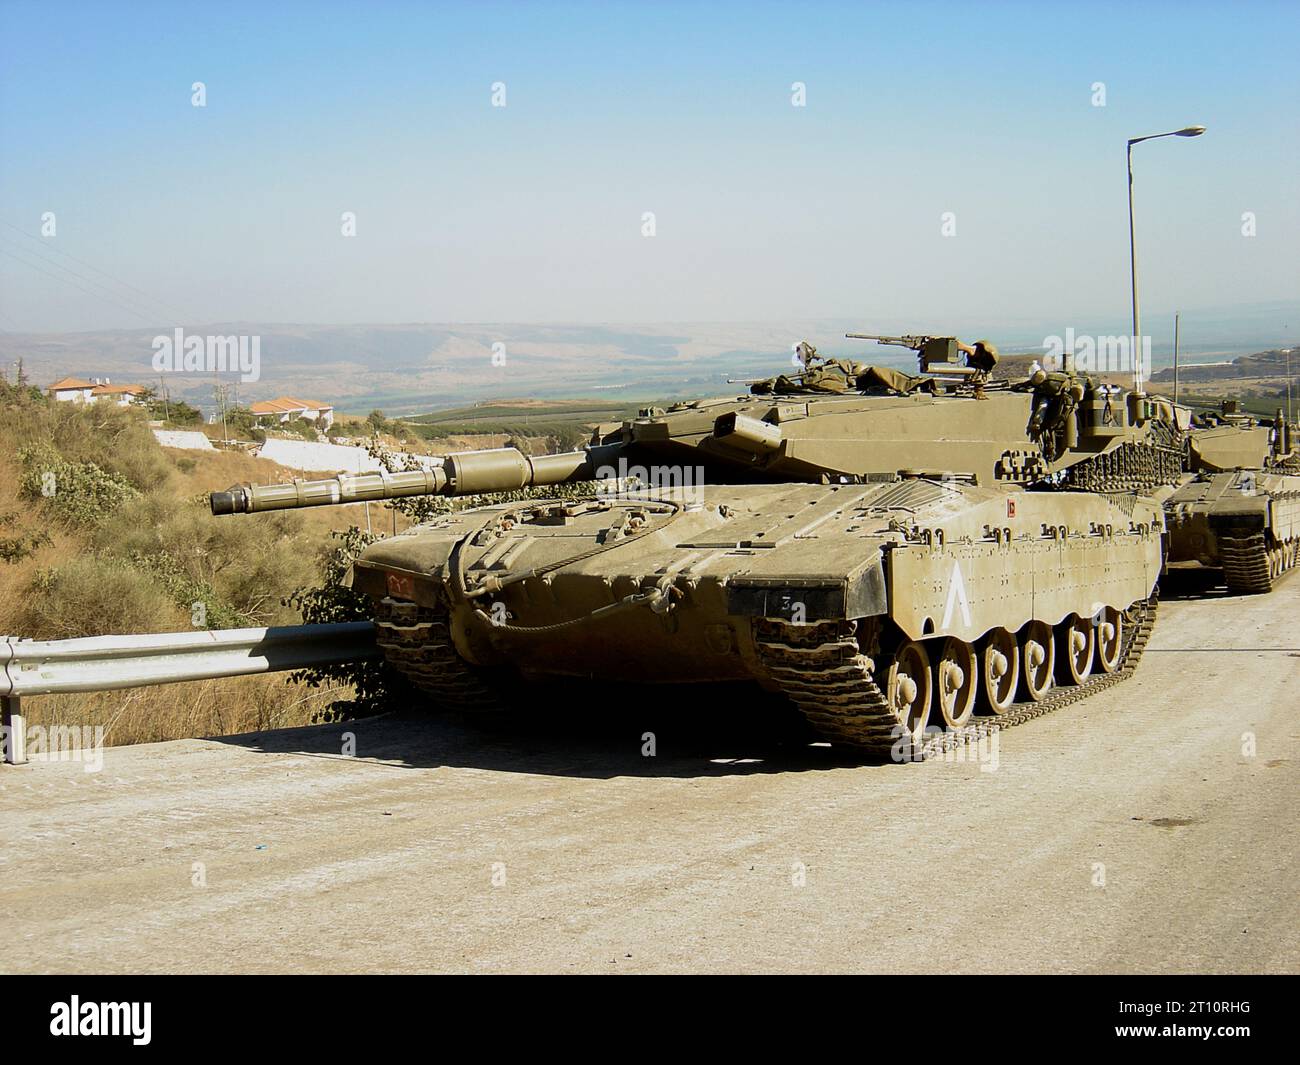 14th August 2006 The Israel-Hezbollah War 2006. After a ceasefire was announced at 08:00, Israeli Merkava 3 (Chariot) tanks are parked on the main road between Kfar Blum and Metula in the north-east of Israel. Stock Photo